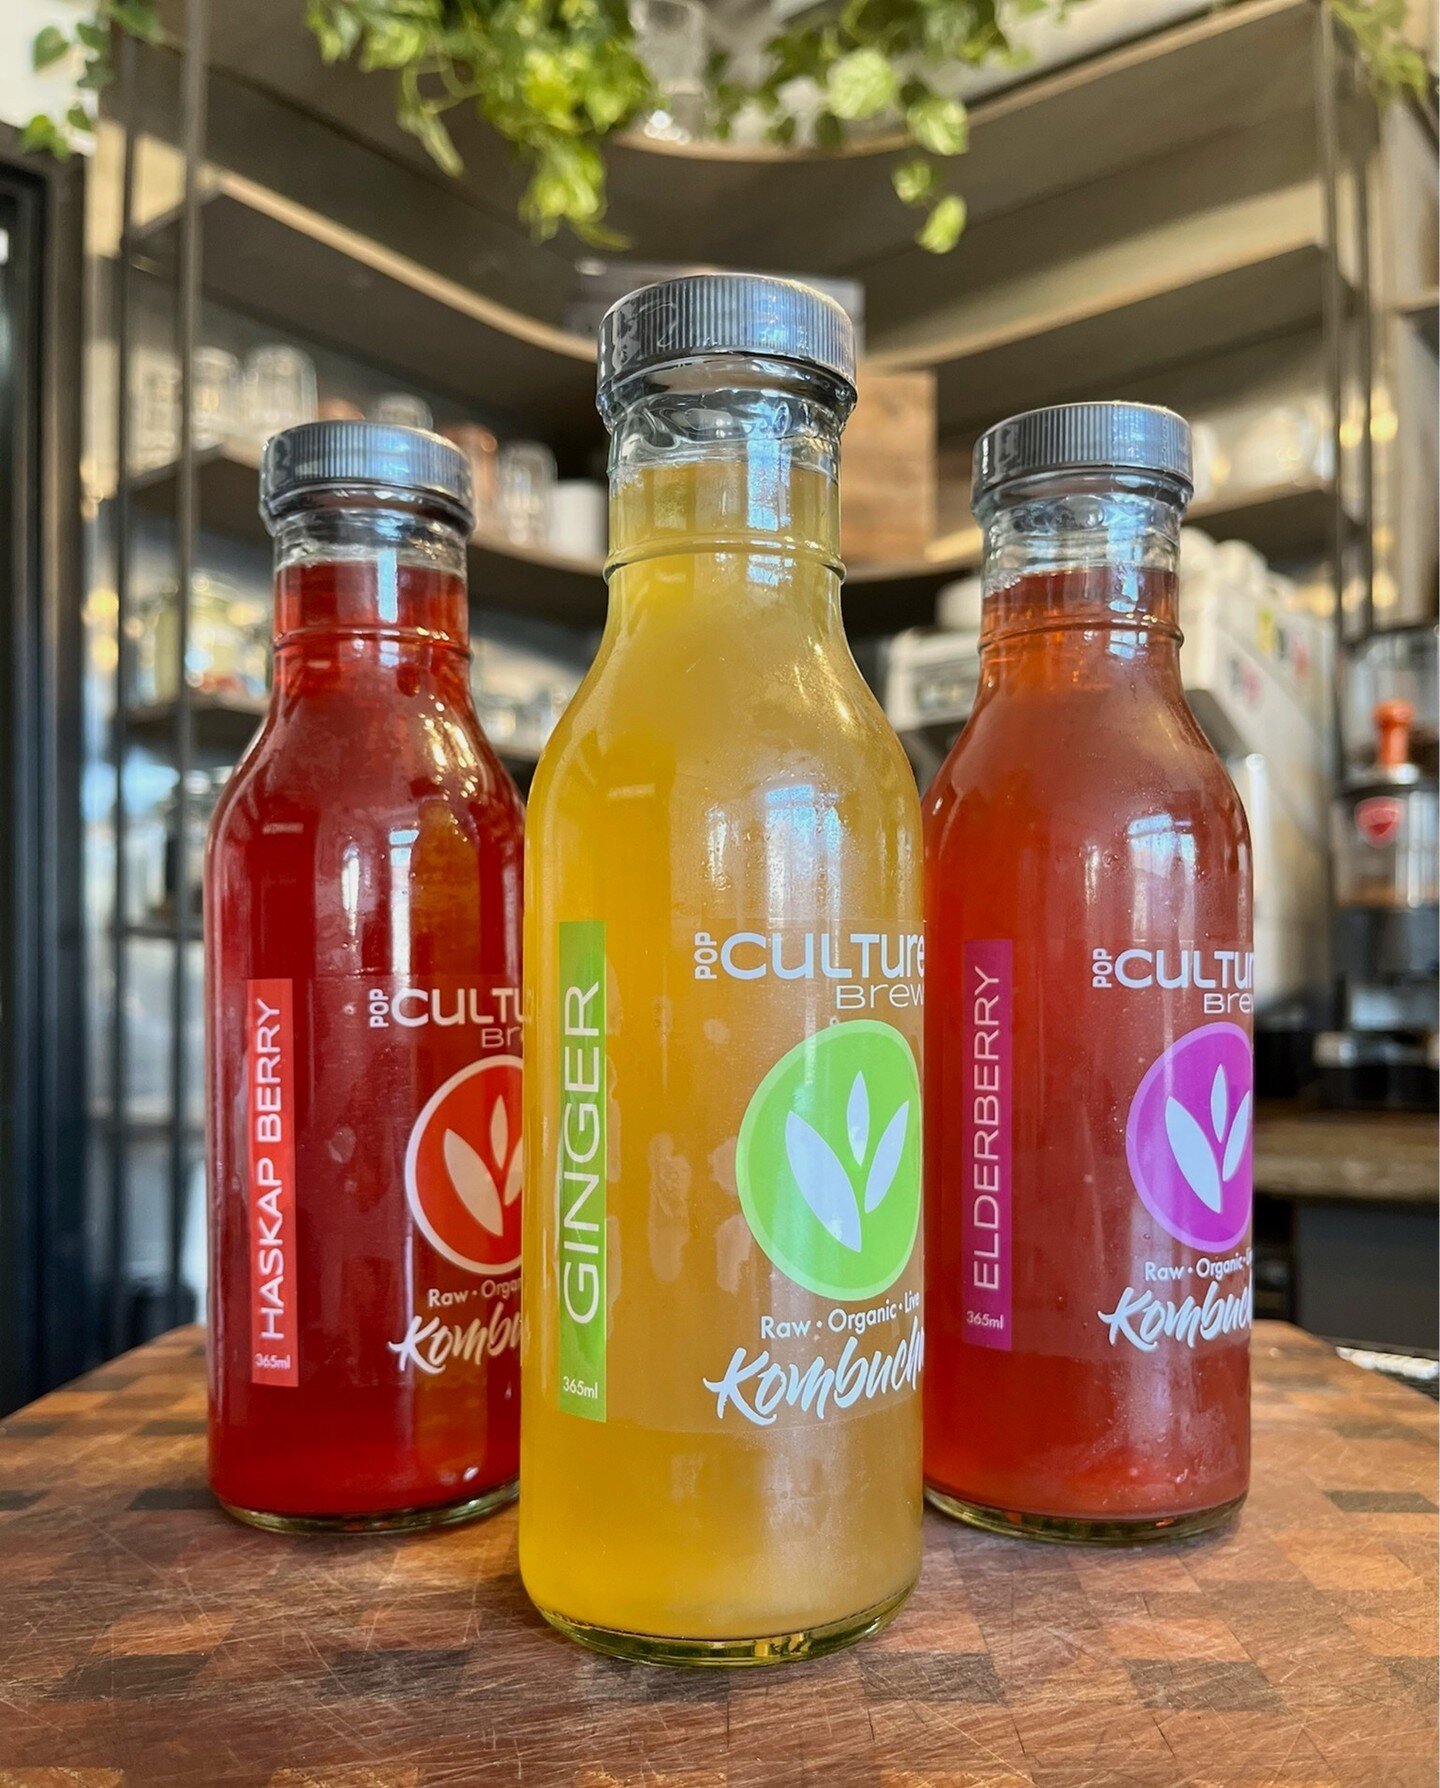 🌱Have you tried our new Pop Culture Brew Co. haskap, ginger, and elderberry kombucha flavours yet? 🥰 🫚

🌱Pop Culture Brew Co. Kombucha haskap berries are sourced from Sweet Earth Farms in Earltown, NS, and pressed in-house. Haskap is super high i